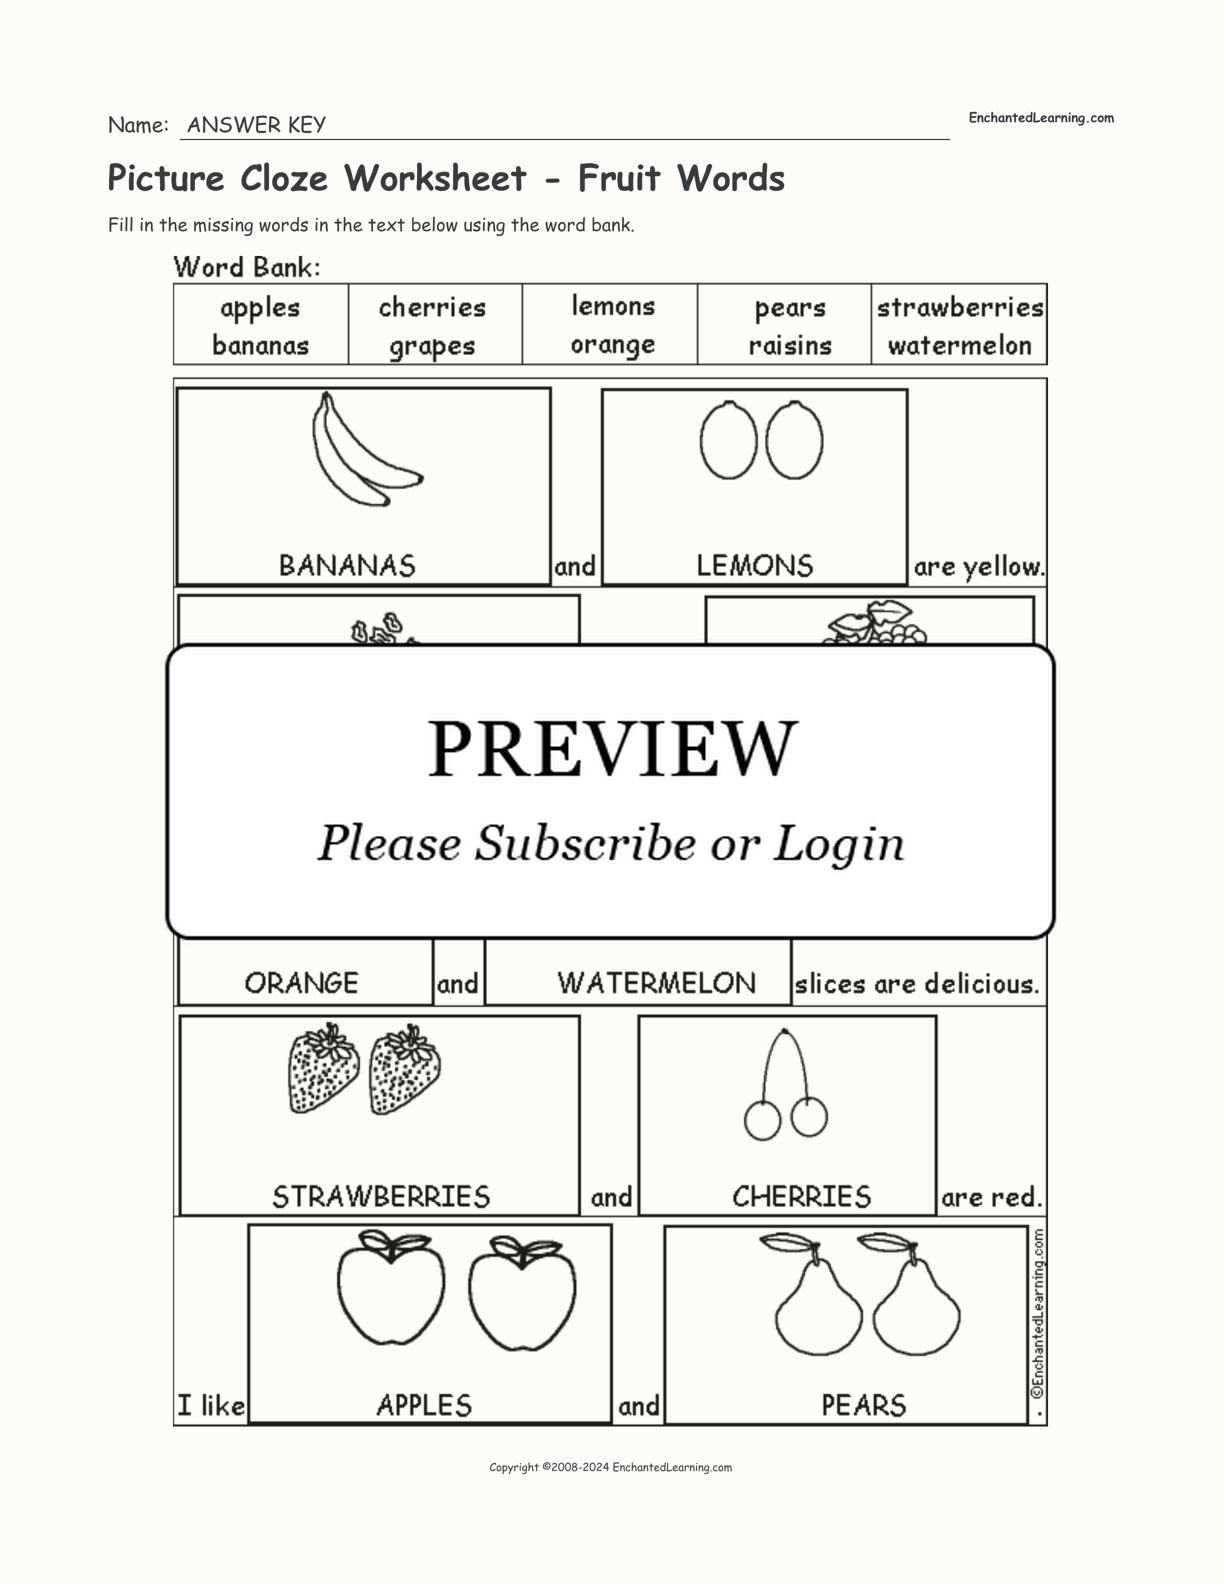 Picture Cloze Worksheet - Fruit Words interactive worksheet page 2